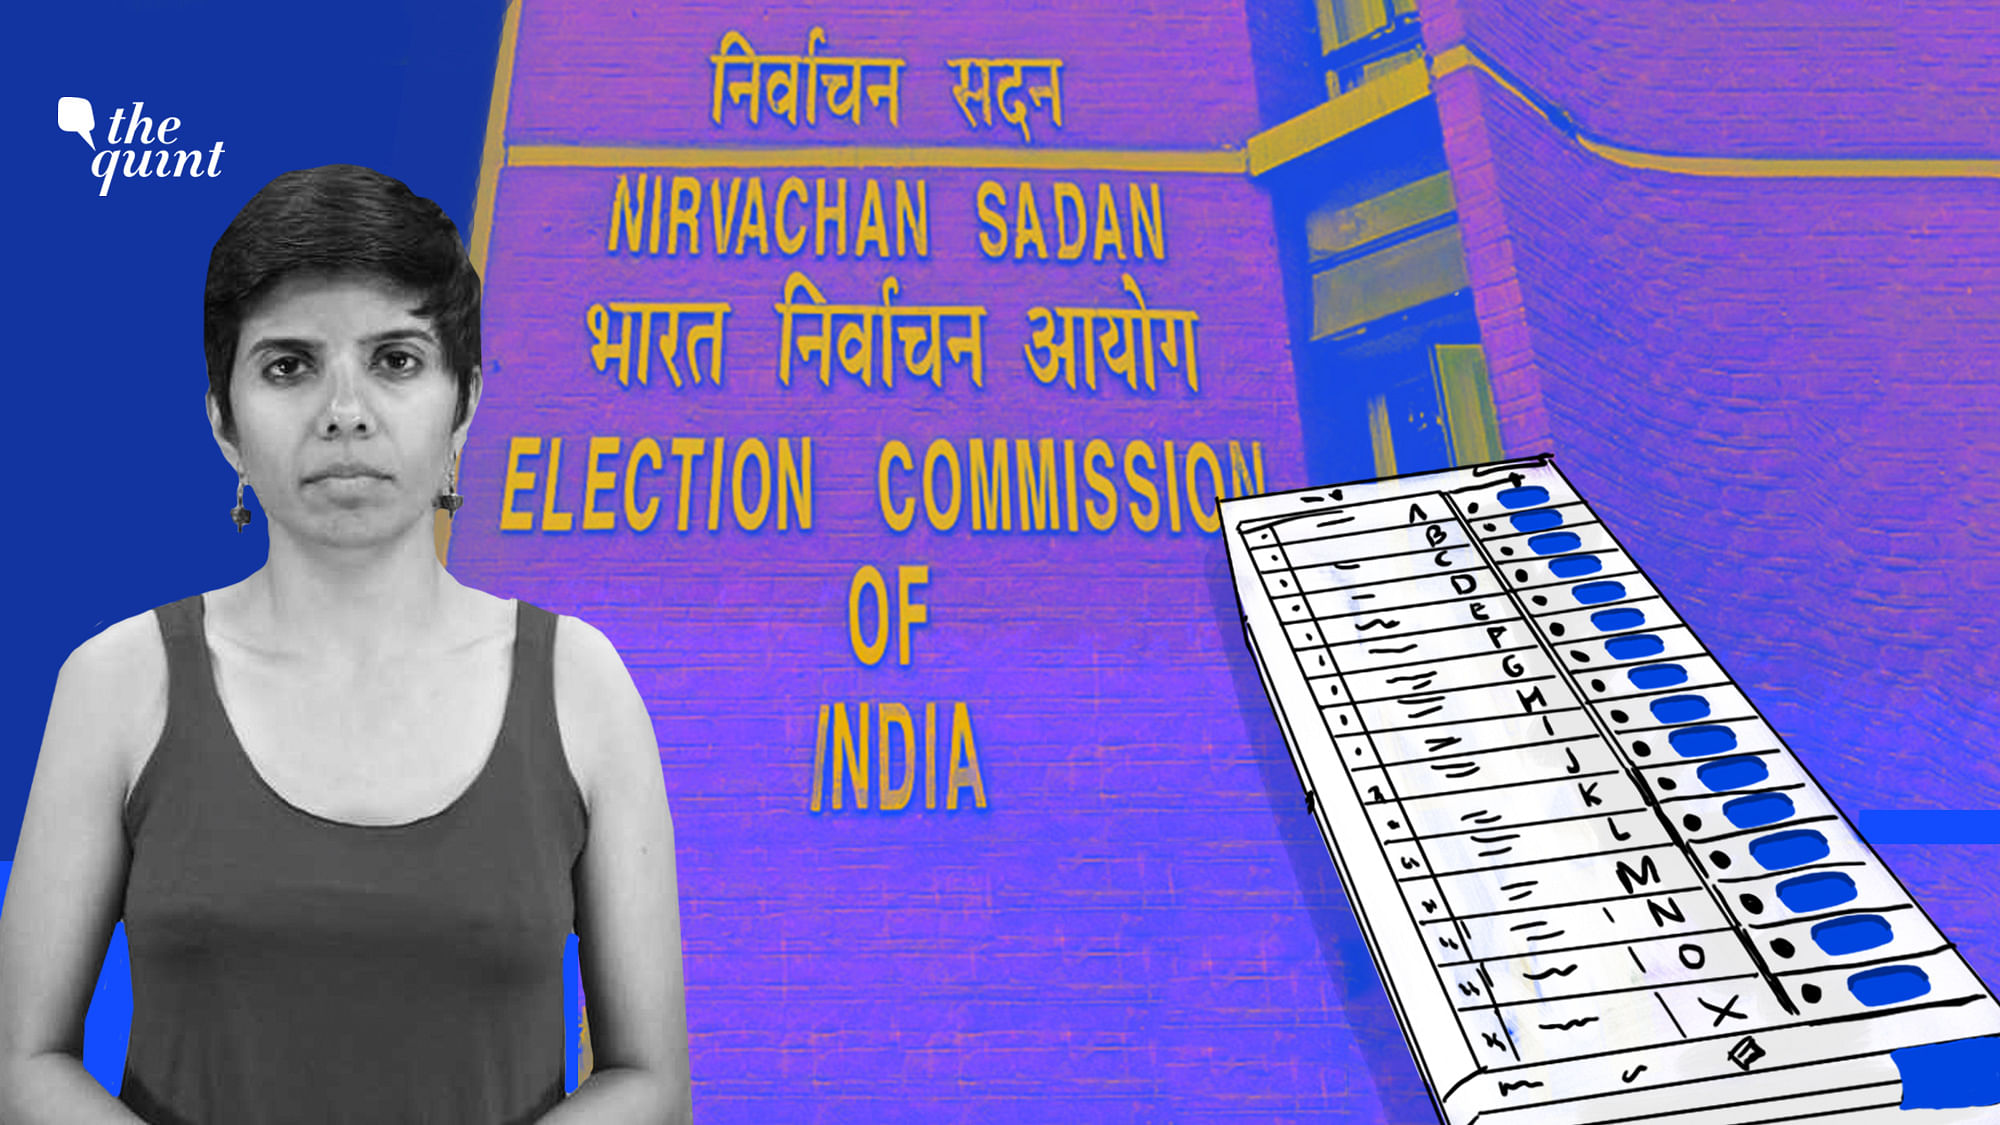 EVM Machine and VVPAT: The Quint exposes how private consulting engineers are handling Electronic Voting Machines (EVMs) and the Voter Verified Paper Audit Trail (VVPAT) during the elections.